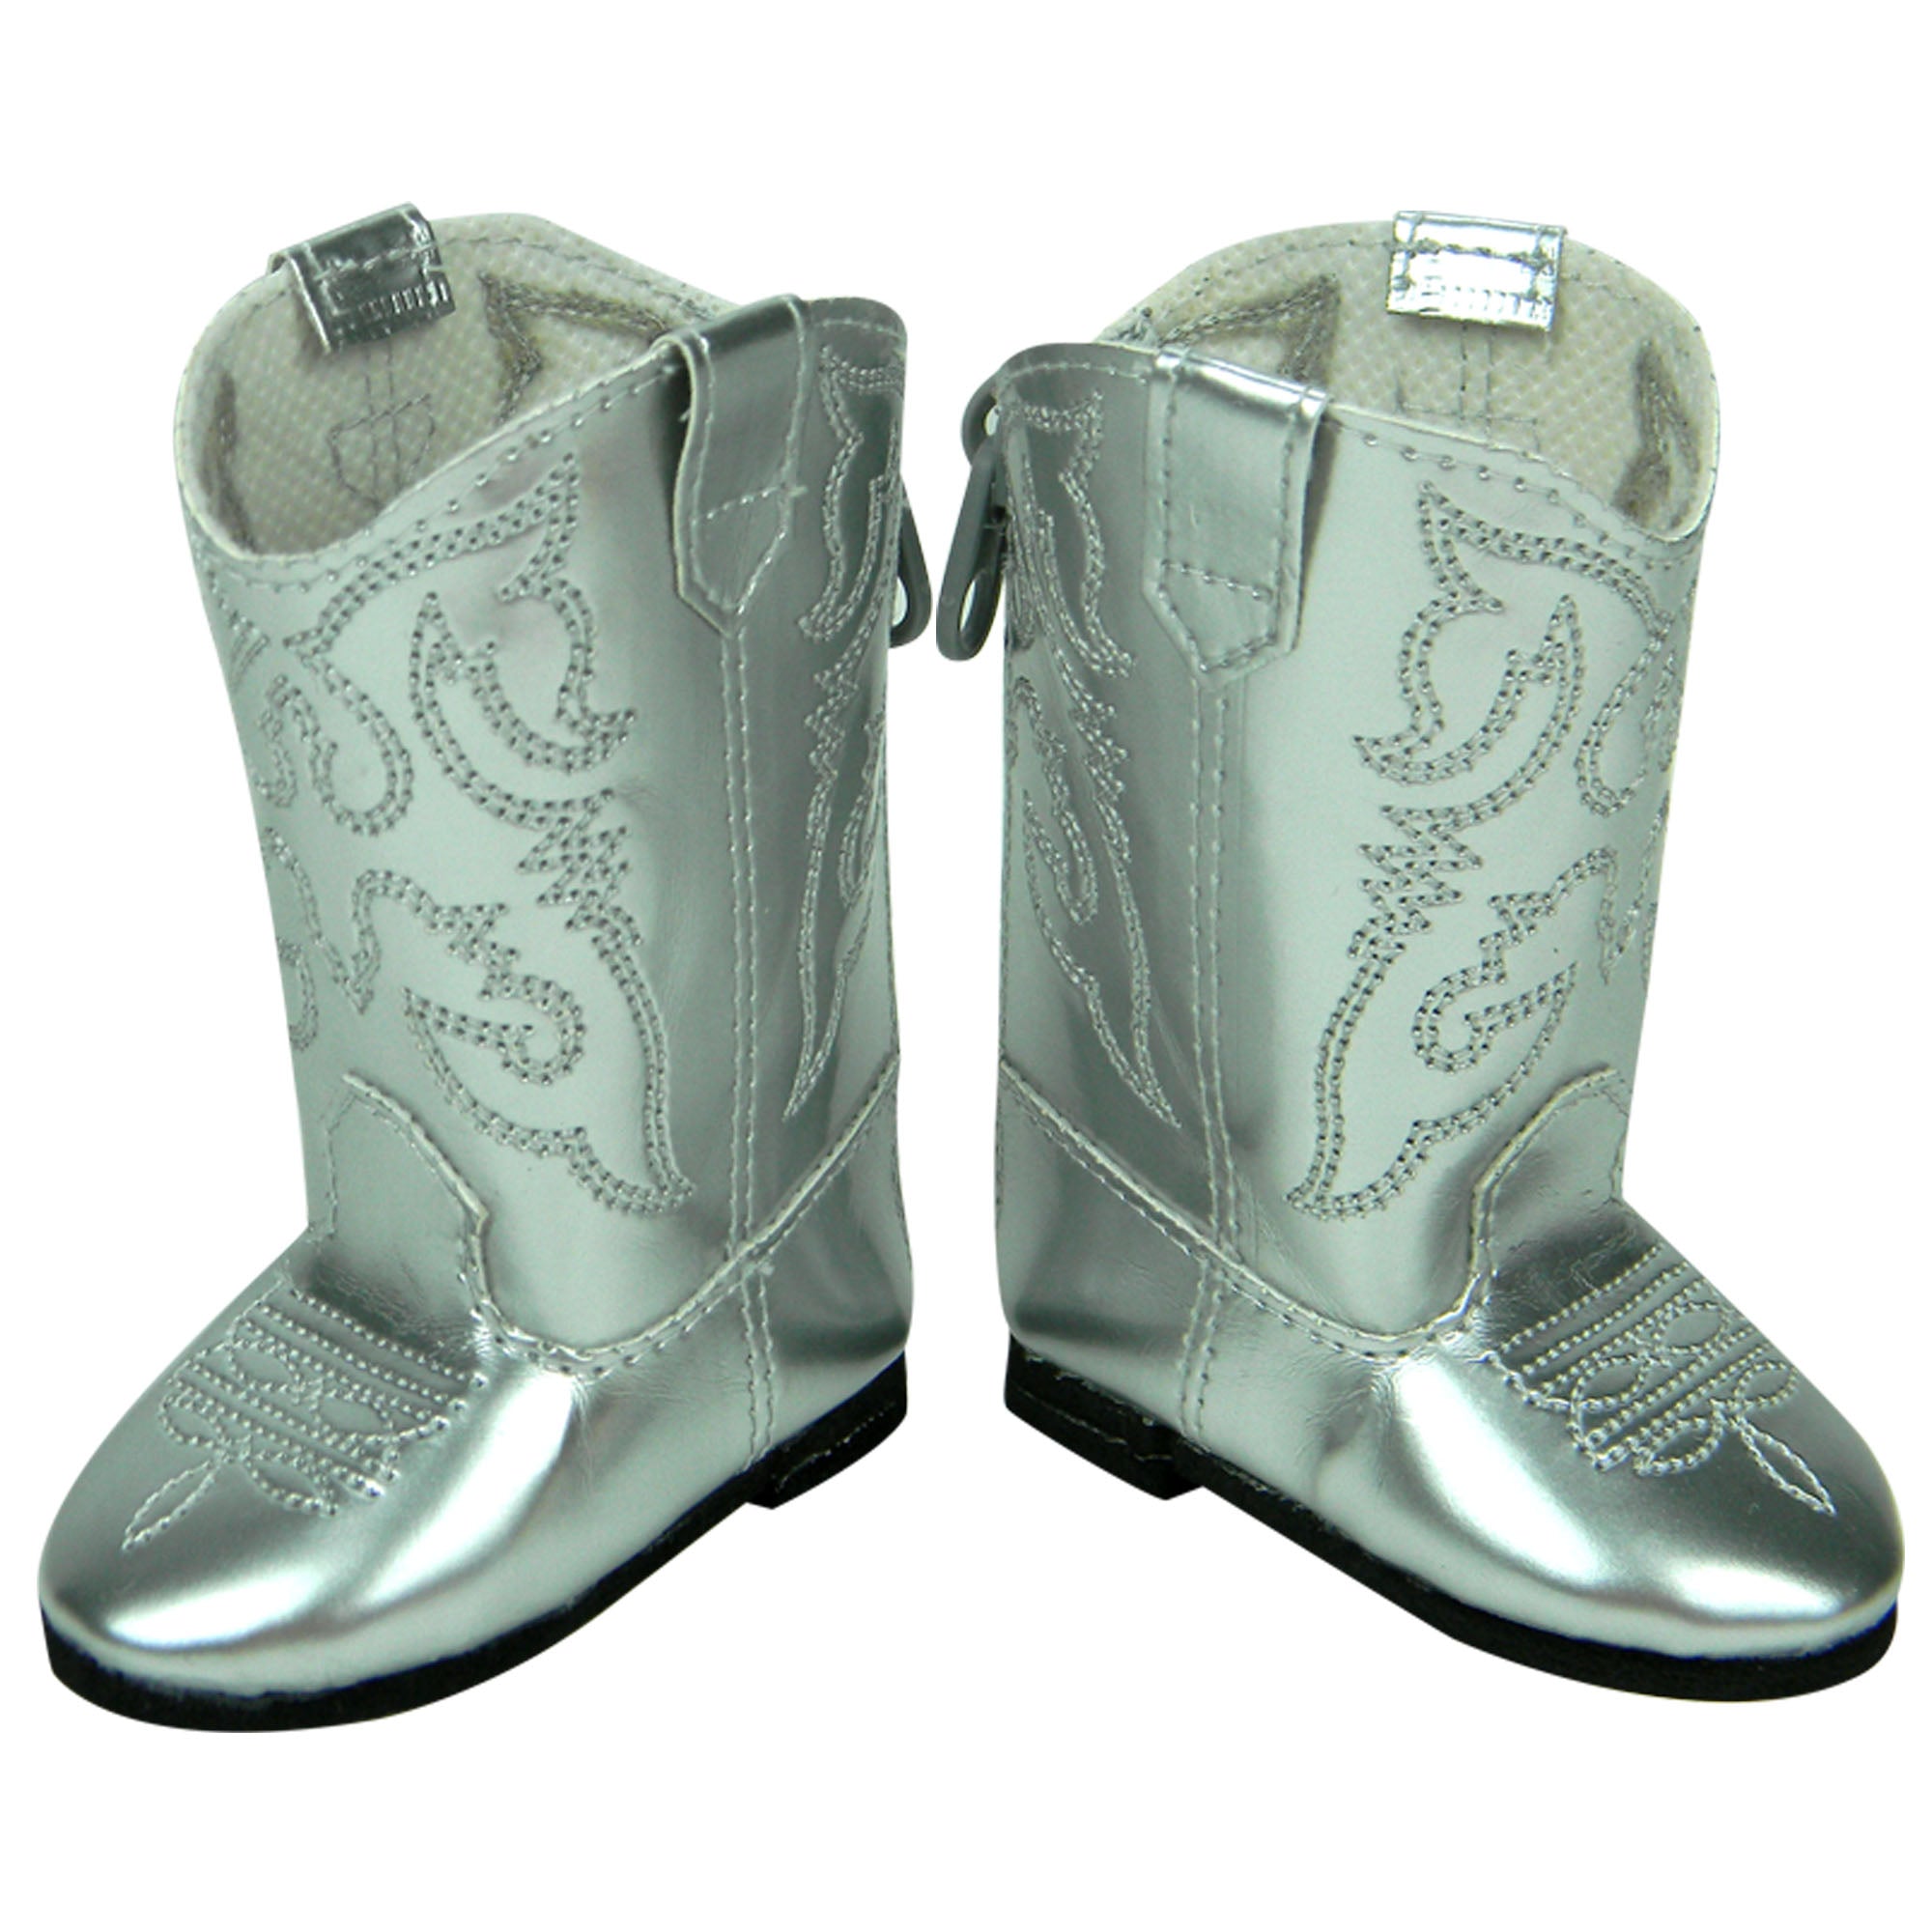 Sophia’s Gender-Neutral Western Faux Leather Cowboy Boots with Traditional Embroidered Details and Zip-Up Back for 18” Dolls, Silver